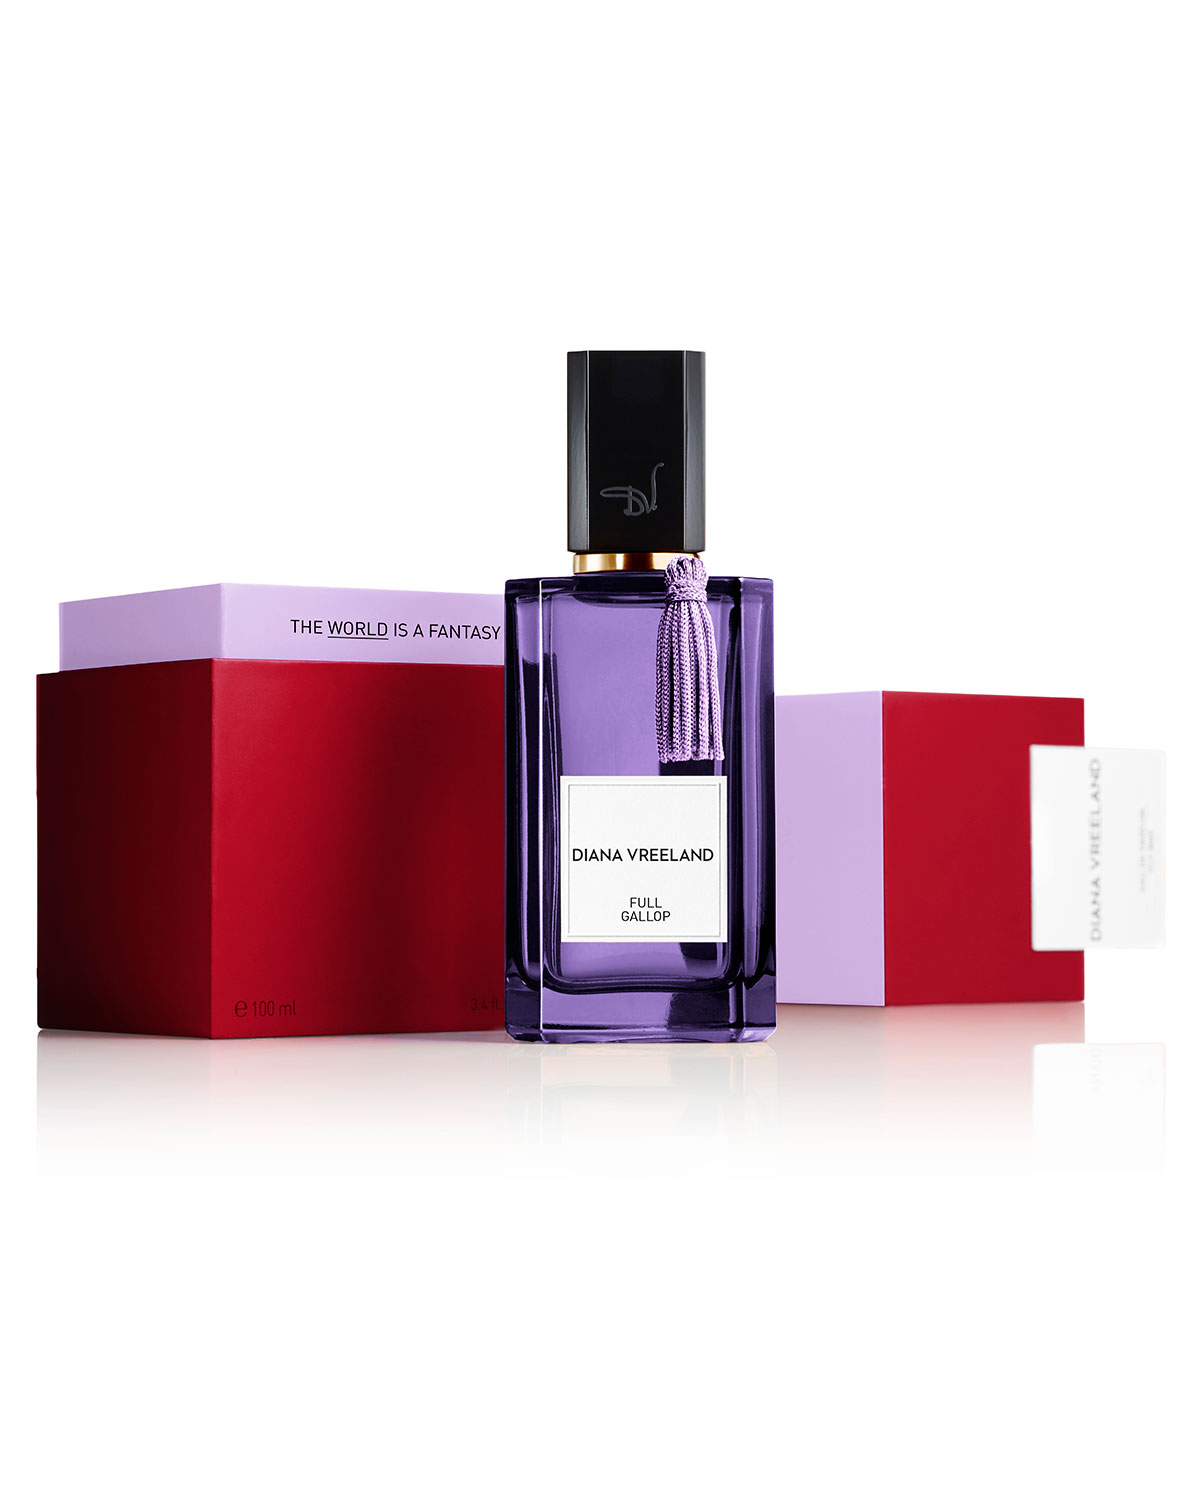 Full Gallop Diana Vreeland perfume - a new fragrance for women 2016